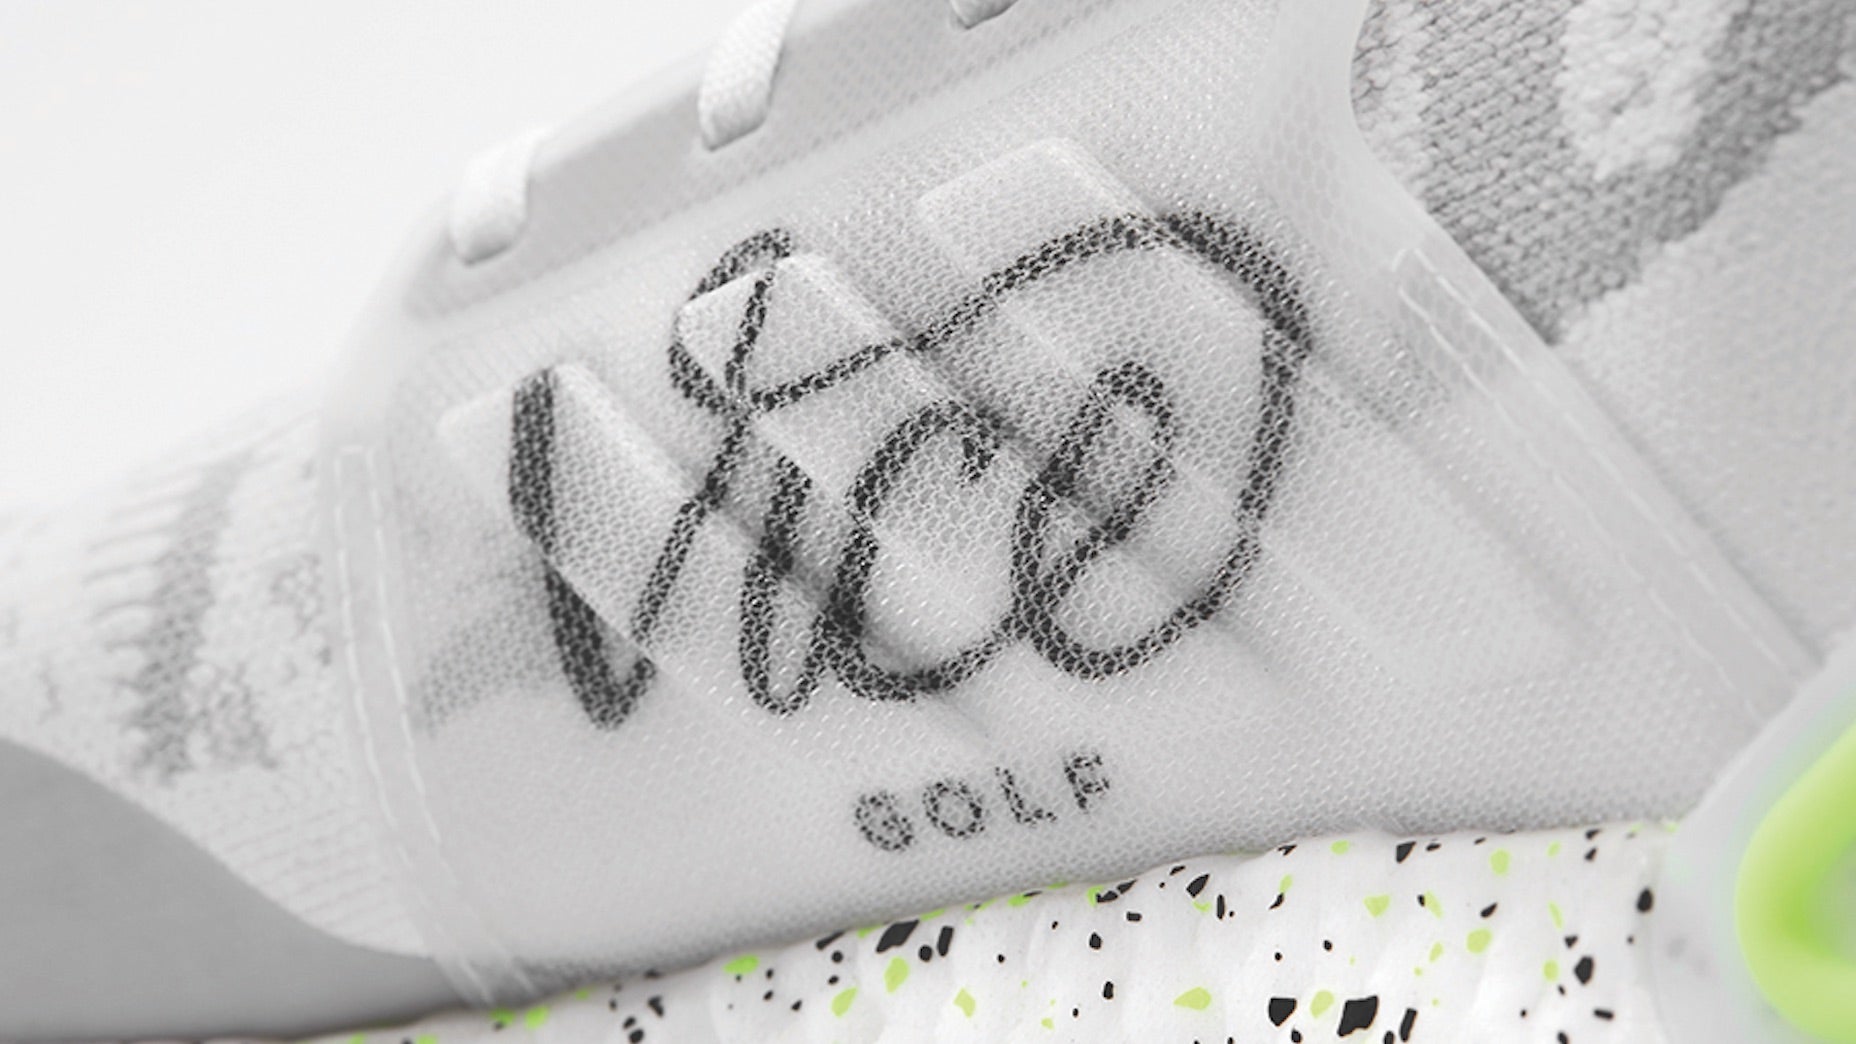 Vice Golf, Adidas join forces for special shoe collaboration